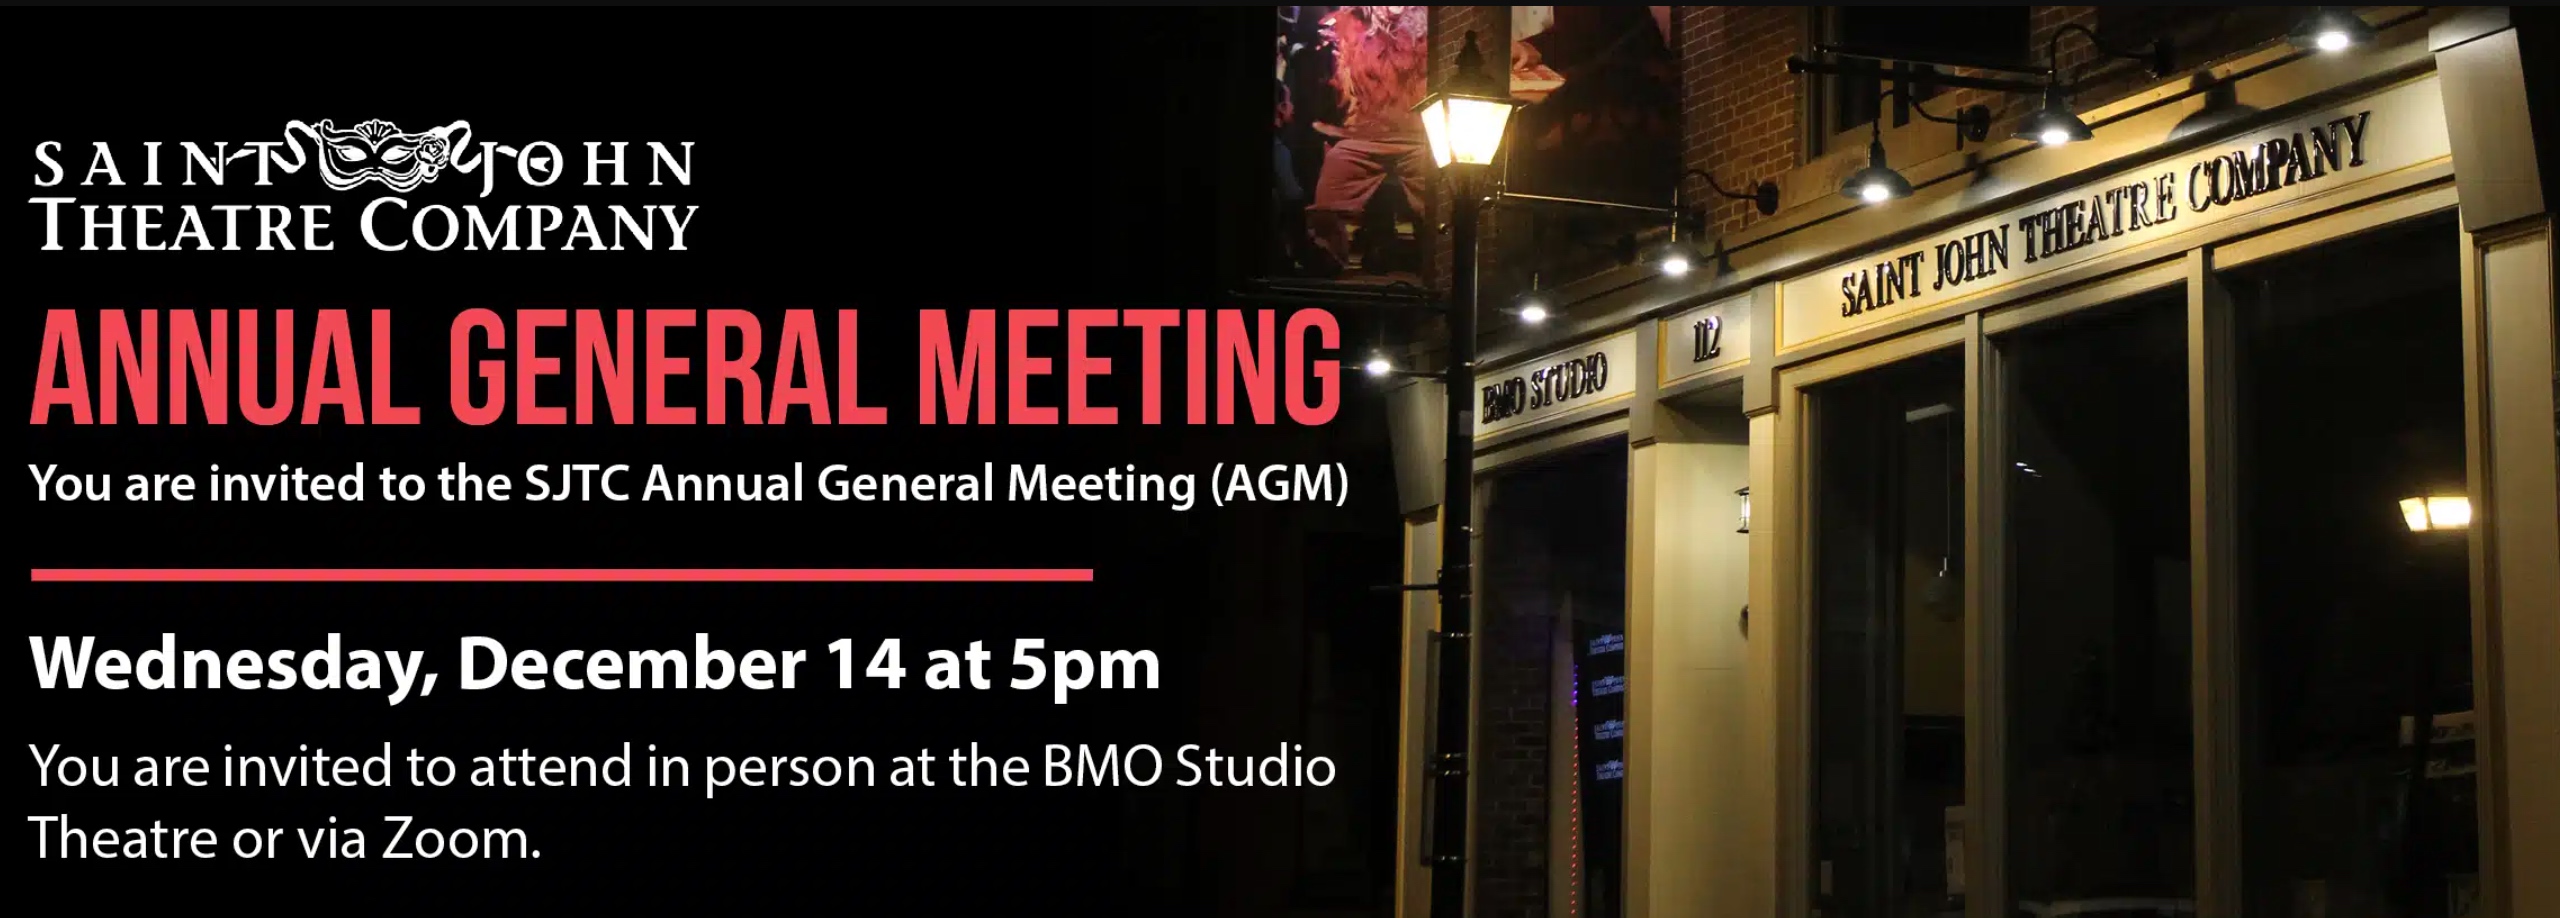 Saint John Theatre Company Annual General Meeting. You are invited to the SJTC Annual General Meeting. Wednesday, December 14 at 5pm. You are invited to attend in person at the BMO Studio Theatre or via Zoom.